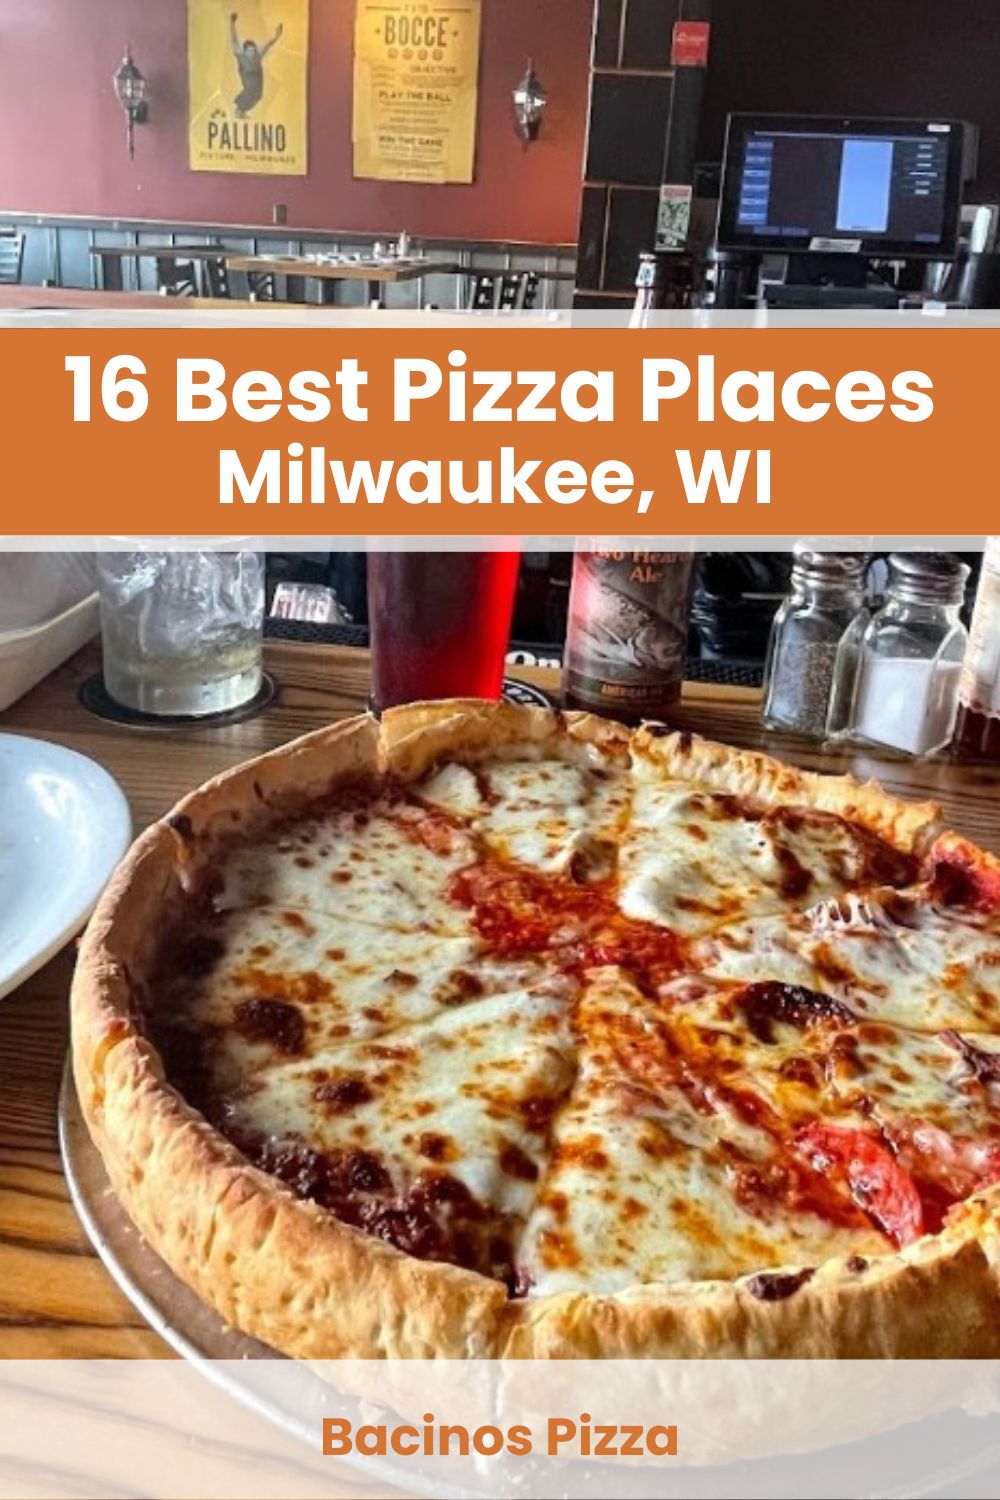 Best Pizza Places in Milwaukee